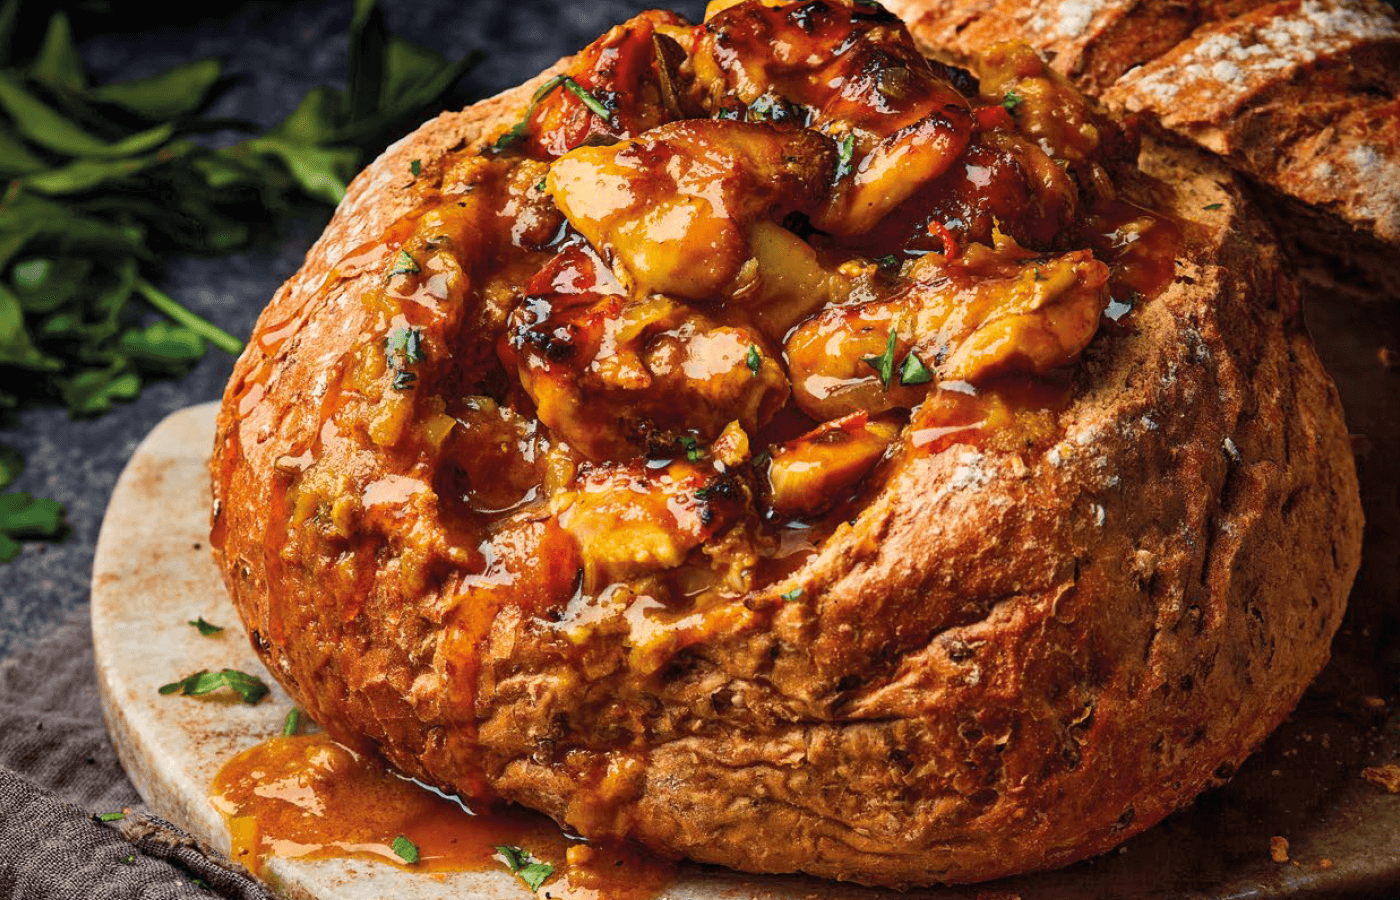 Moy Park Chicken Recipe - South African Bunny Chow